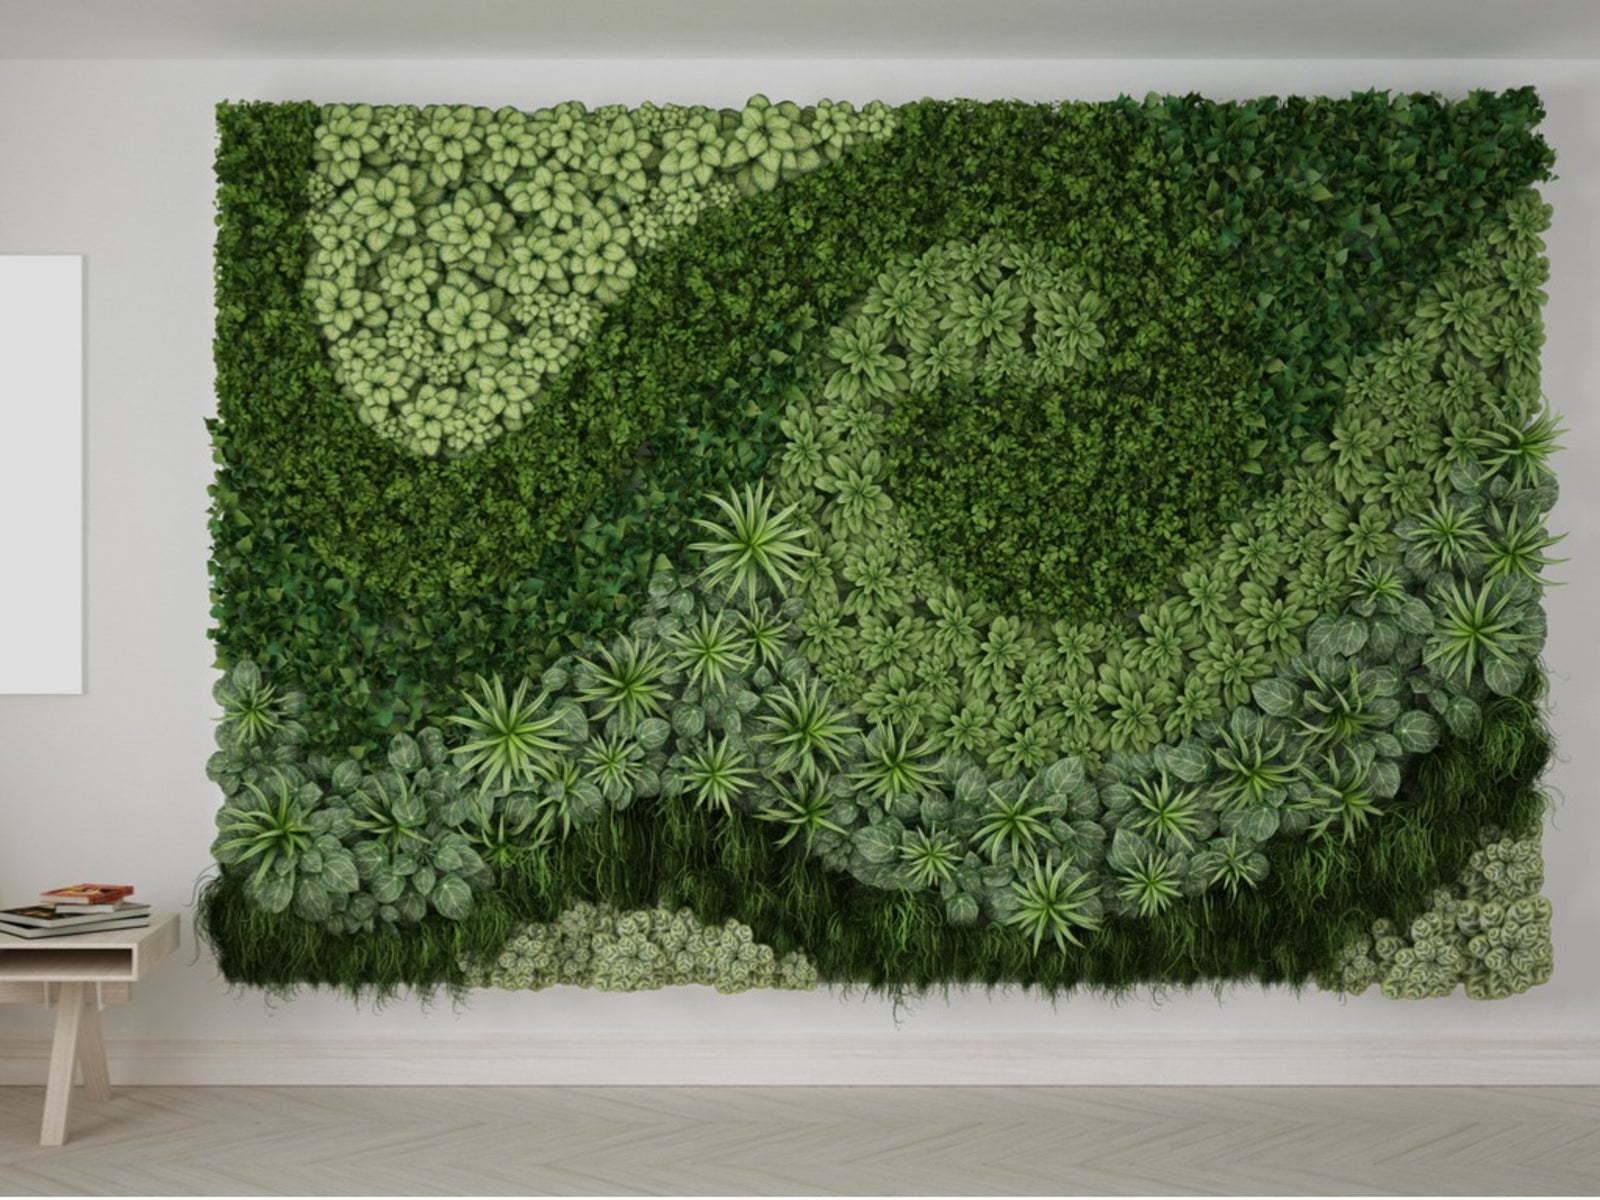 Living Wall Garden - Creating A Living Wall Of Plants For Indoors